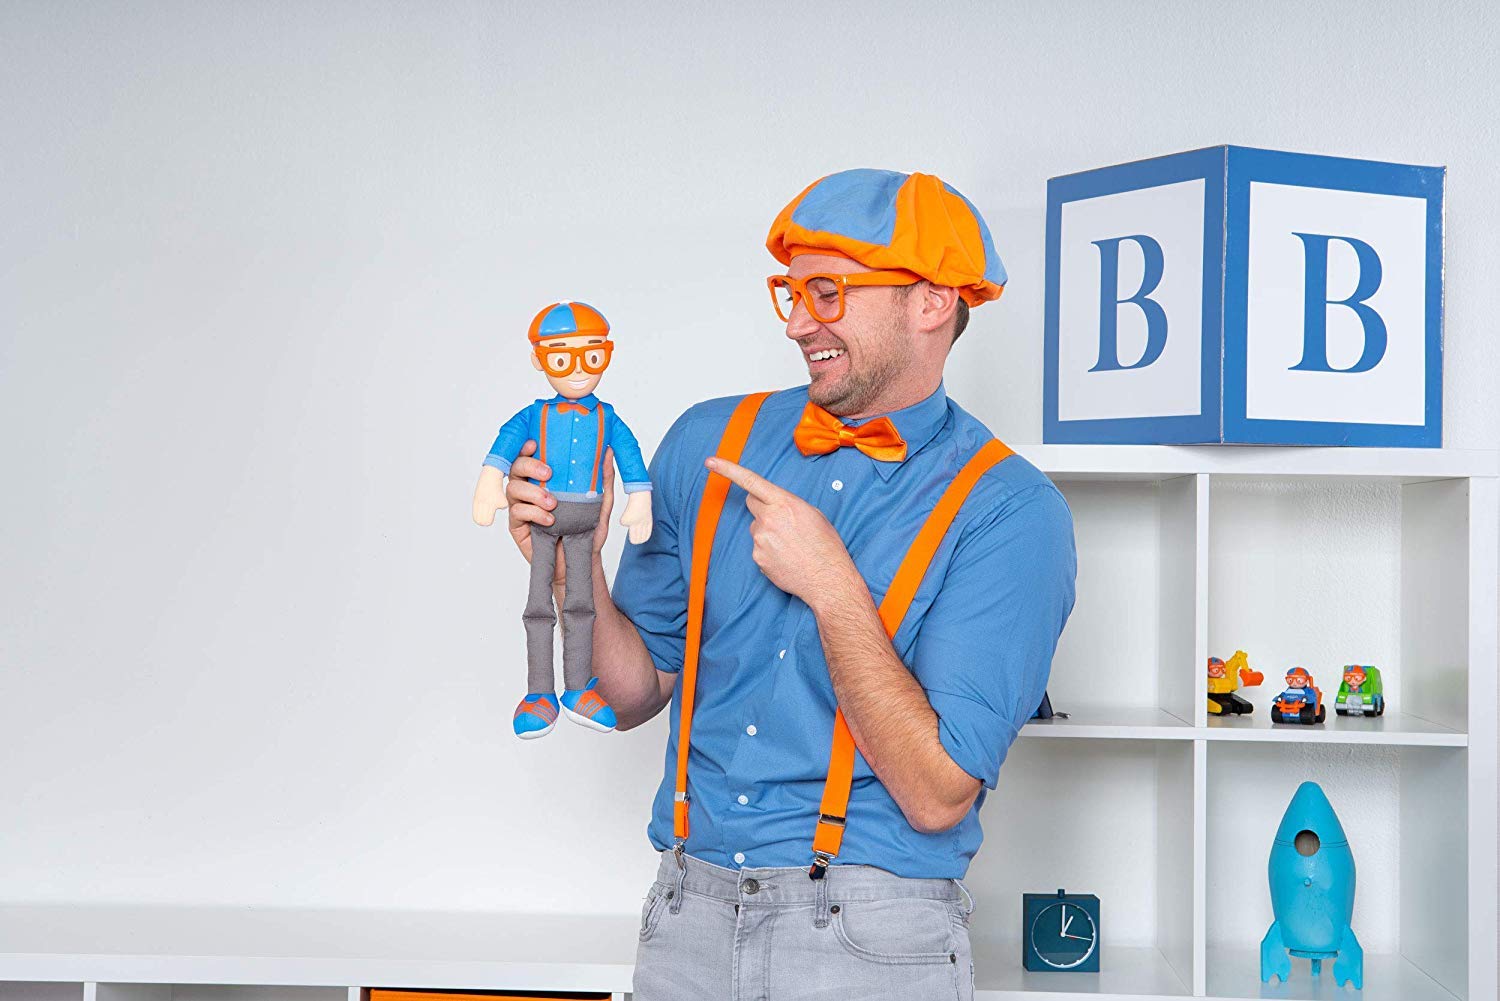 Blippi Bendable Plush Doll, 16” Tall Featuring SFX - Squeeze The Belly to Hear Classic catchphrases - Fun, Educational Toys for Babies, Toddlers, and Young Kids